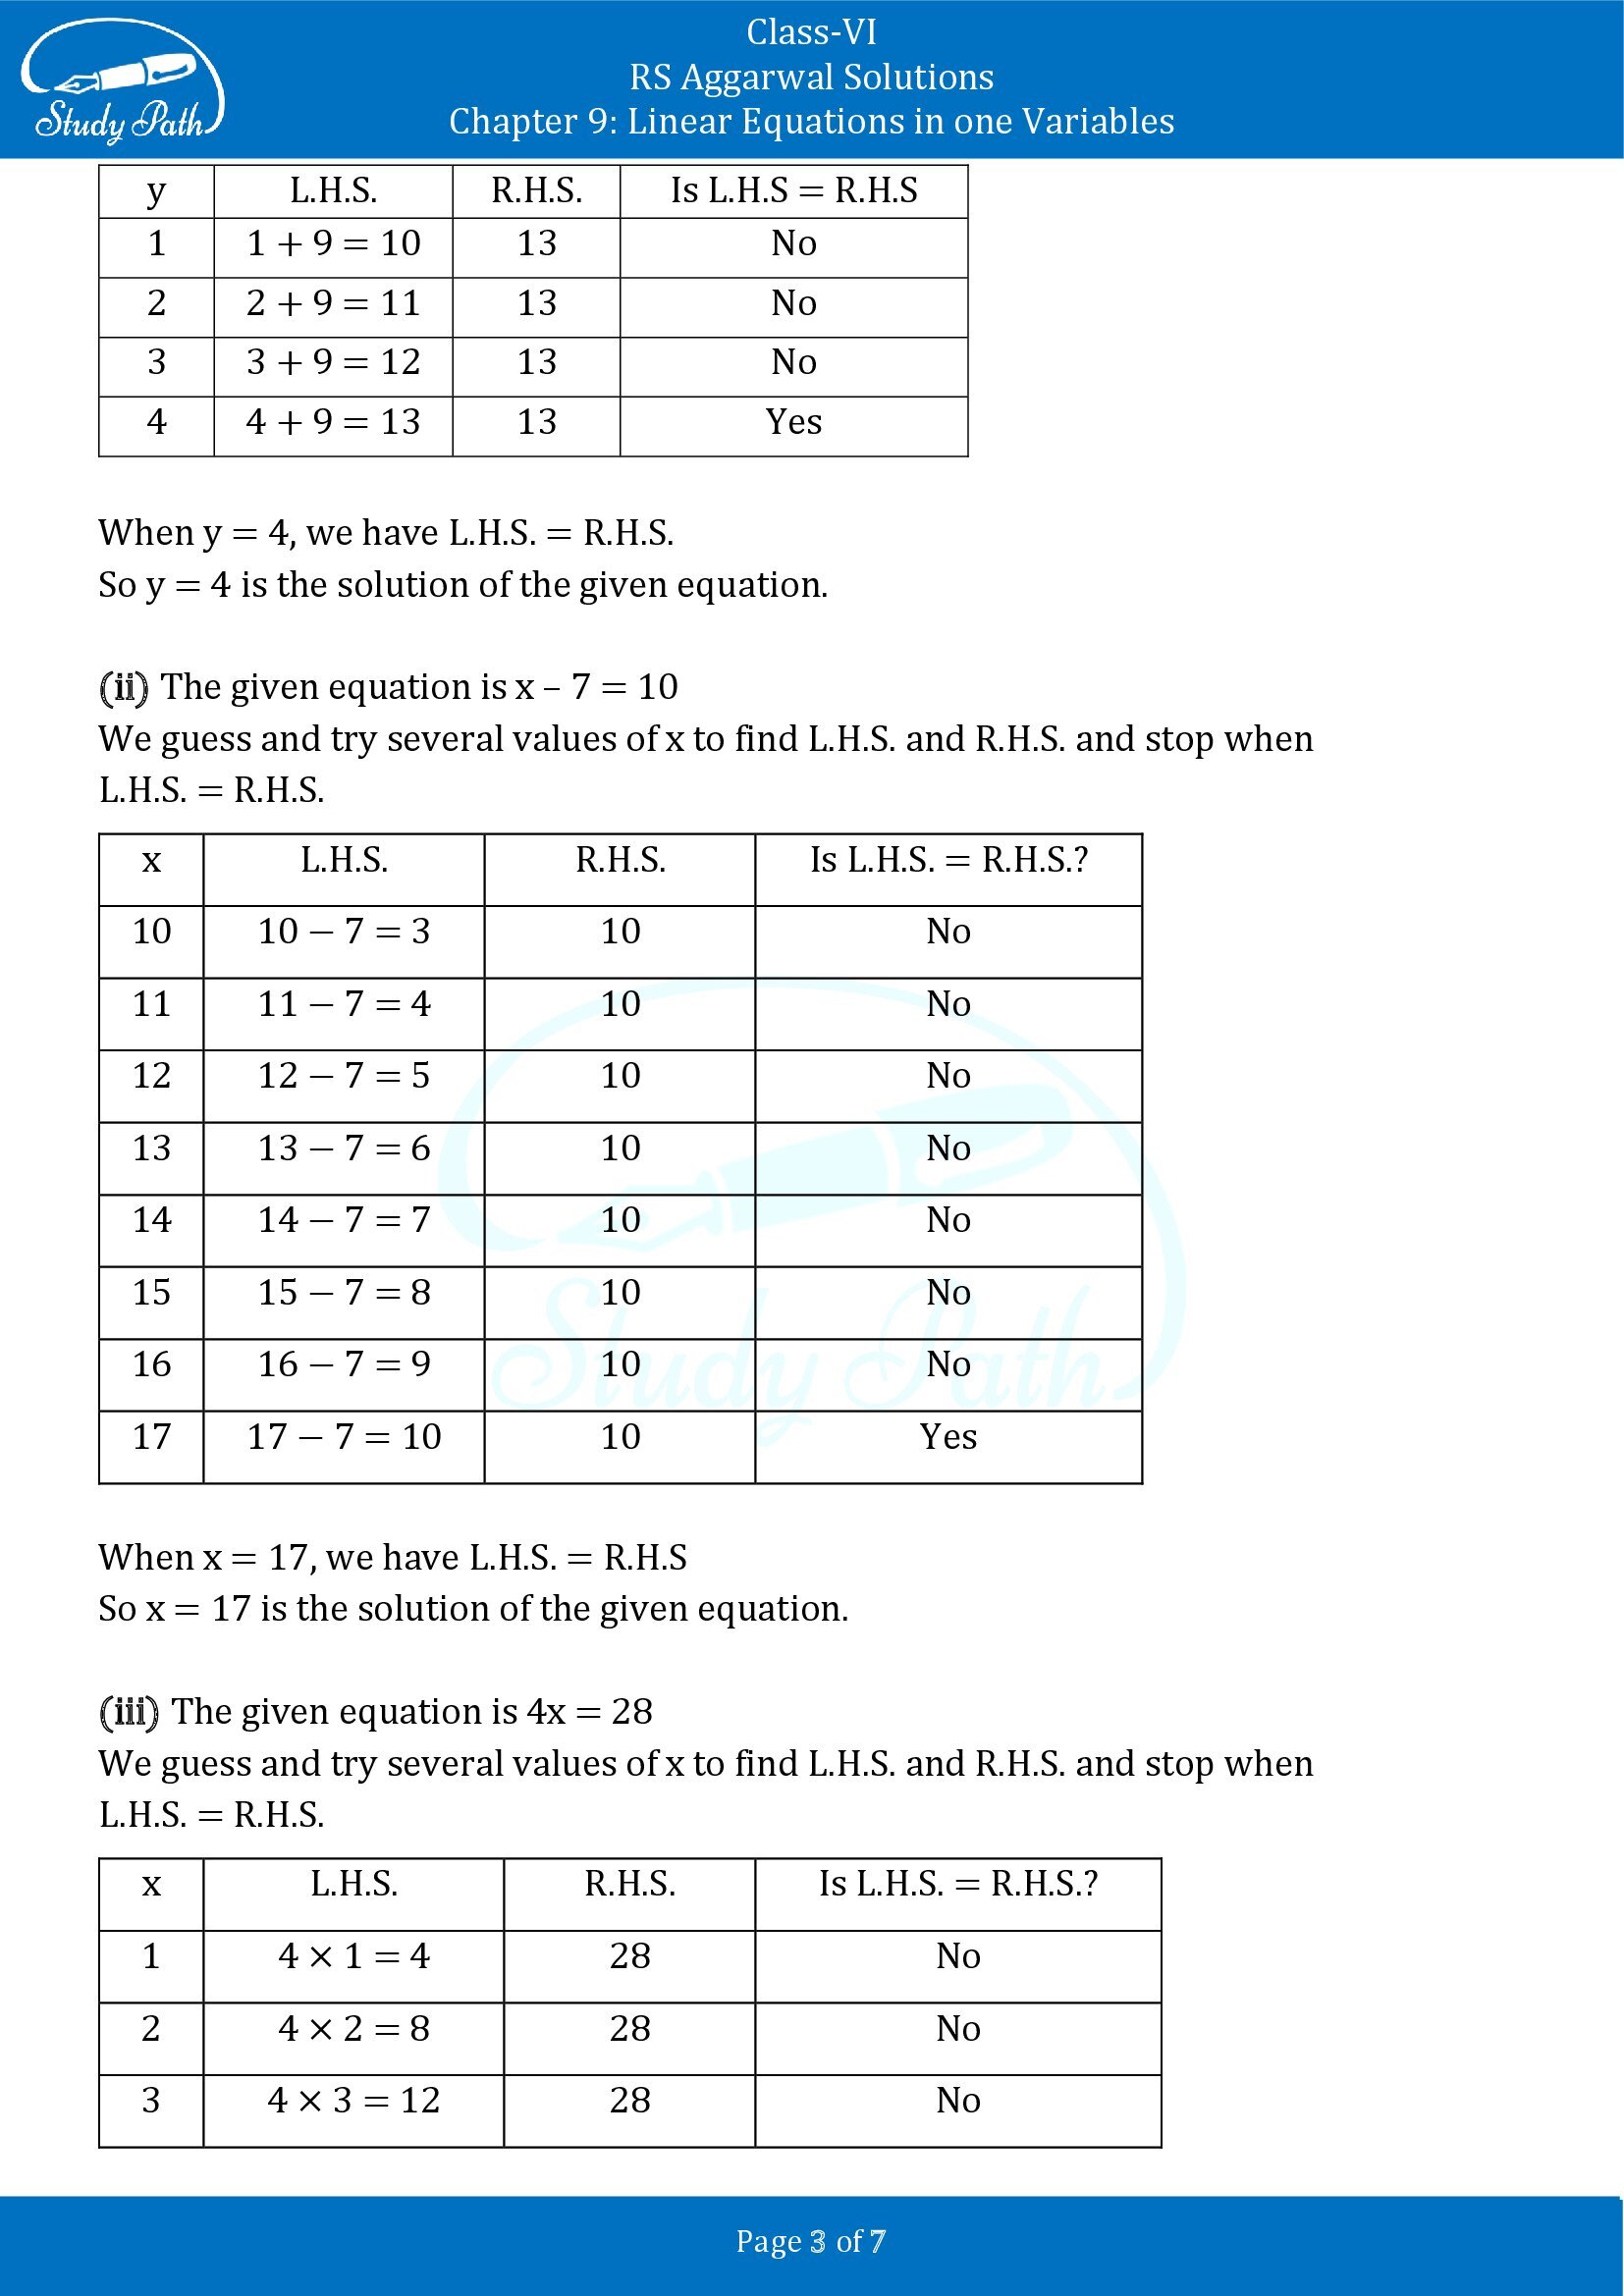 RS Aggarwal Solutions Class 6 Chapter 9 Linear Equations in One Variable Exercise 9A 00003